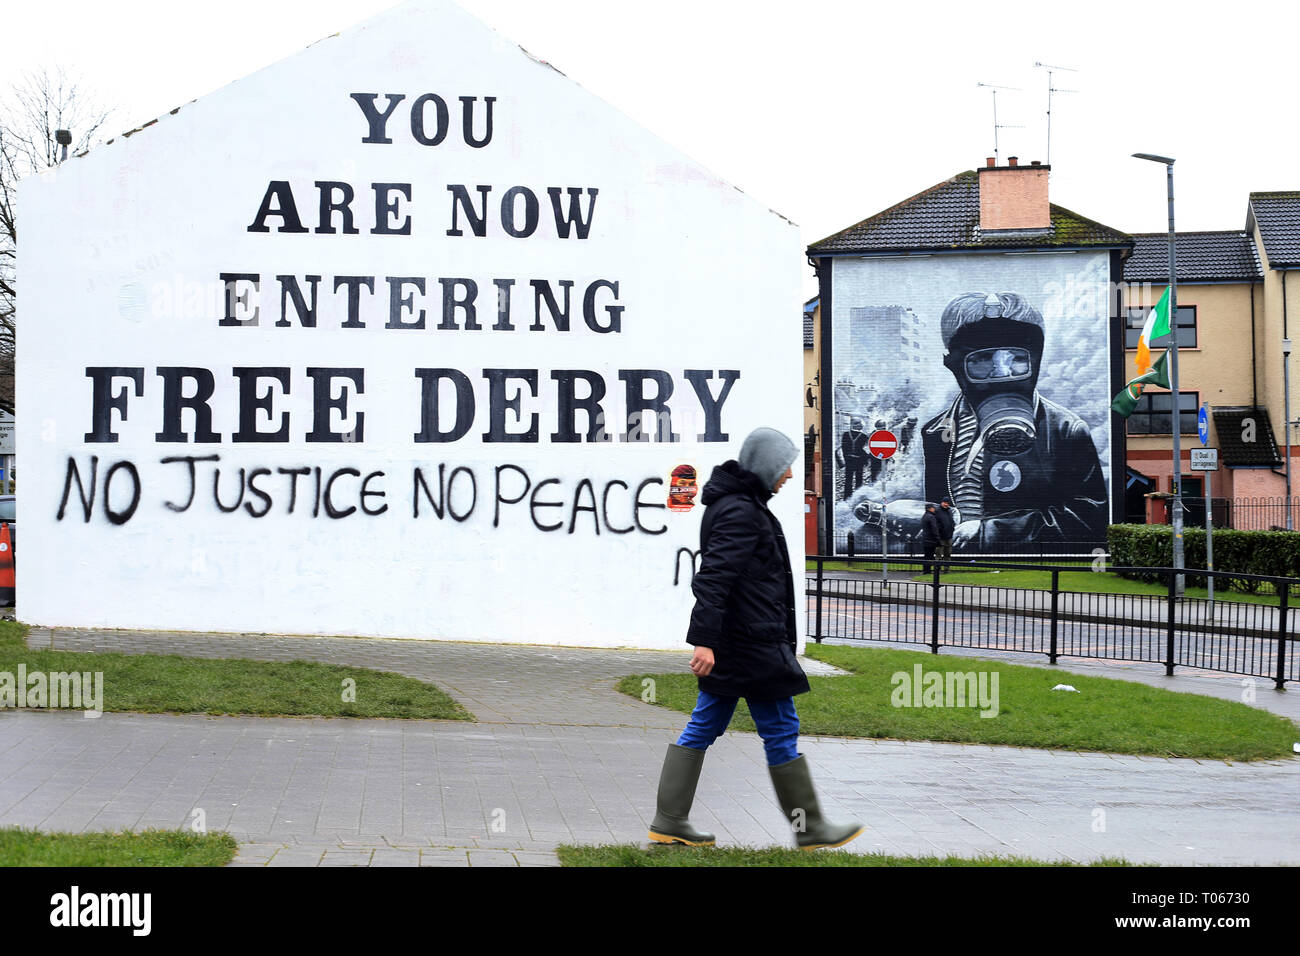 Londonderry, Northern Ireland. 16th Mar 2019. Free Derry Corner with fresh graffti as seen in the nationalist catholic Bogside area of Derry (Londonderry), Northern Ireland, March 16, 2019. - Bloody Sunday, sometimes called the Bogside Massacre, was an incident on 30 January 1972 in the Bogside area of Derry, Northern Ireland, when British soldiers shot 28 unarmed civilians during a protest march against internment. Fourteen people died: thirteen were killed outright, while the death of another man four months later was attributed to his injuries. Credit: Irish Eye/Alamy Live News Stock Photo